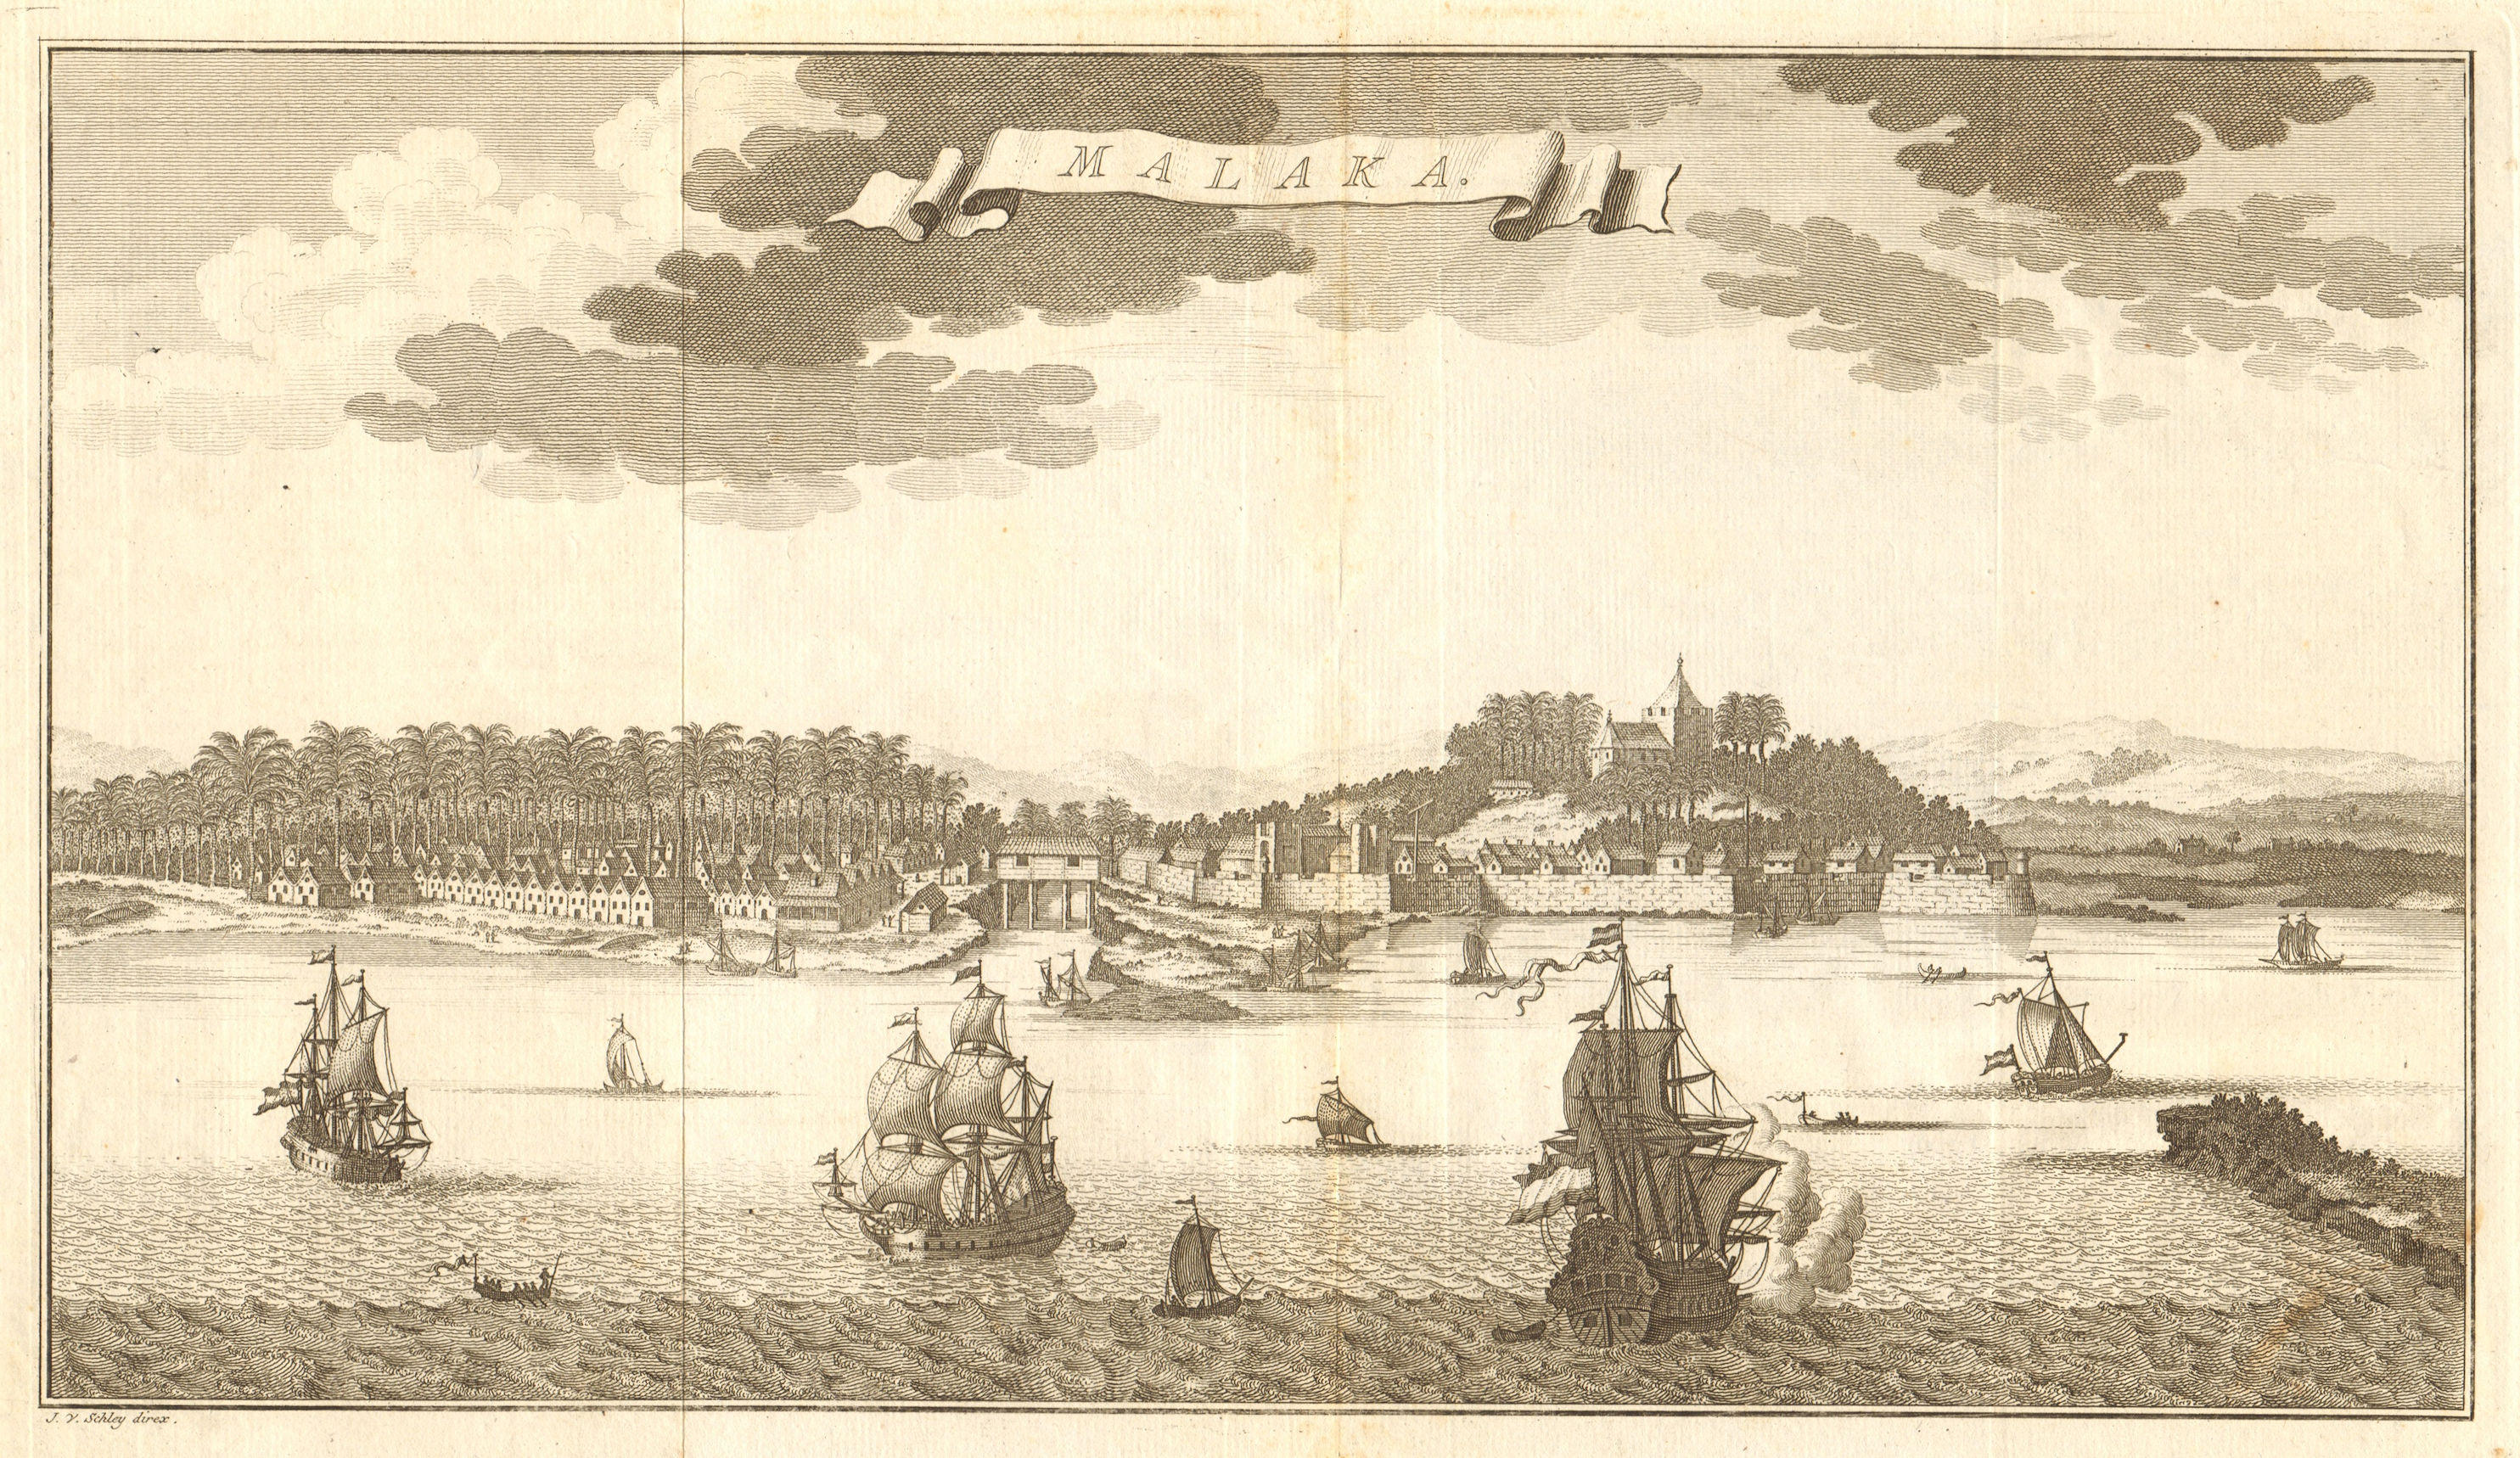 'Malaka'. View of Malacca city, Malaysia. East Indies. SCHLEY 1755 old print